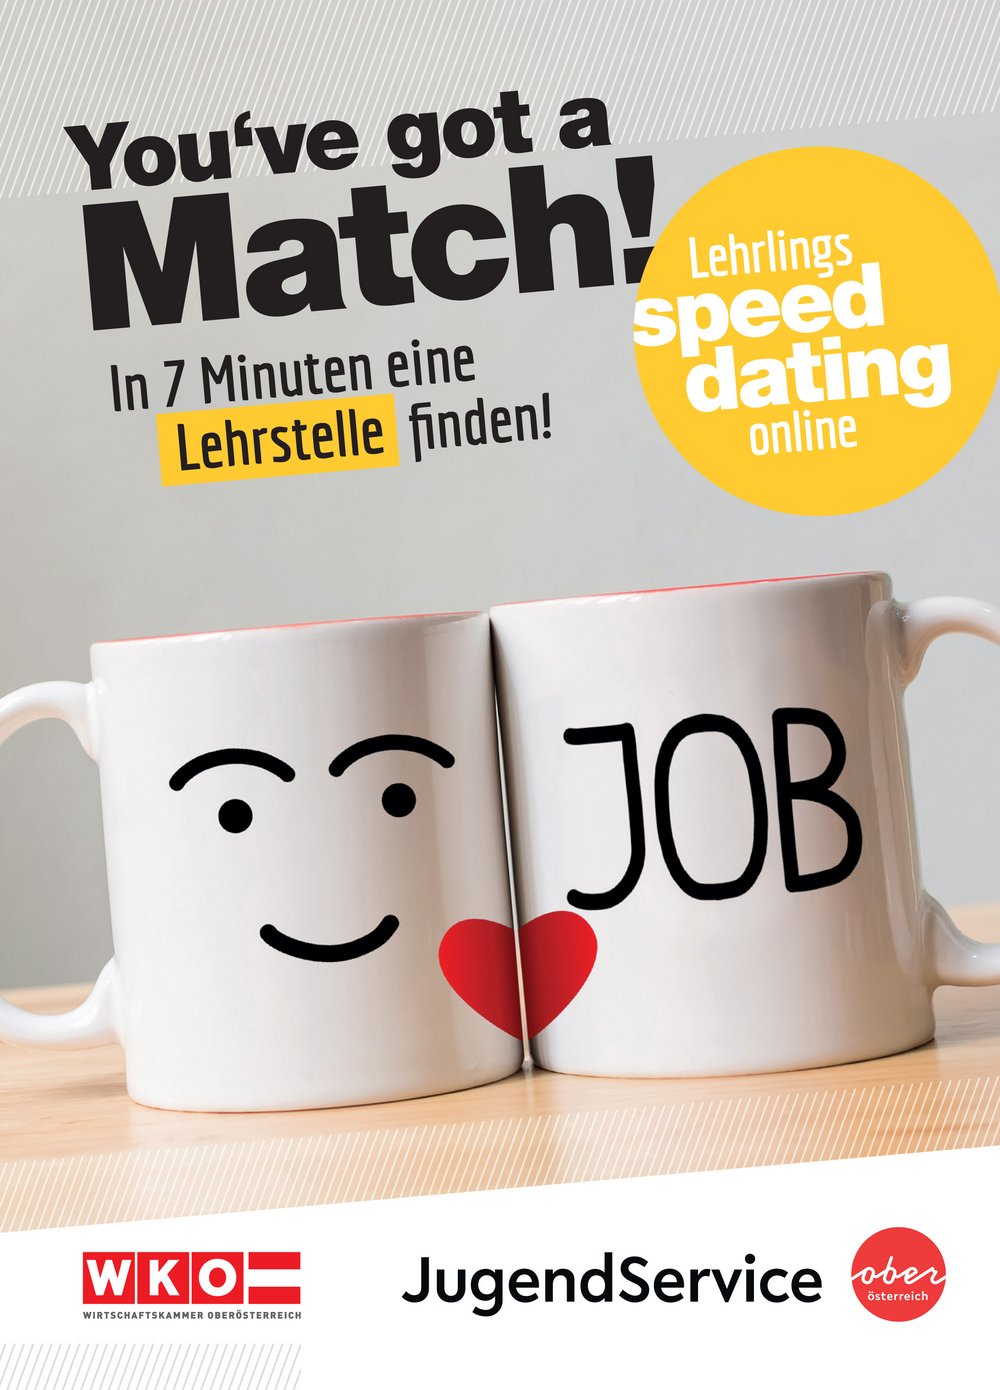 Mettmach Dating Events